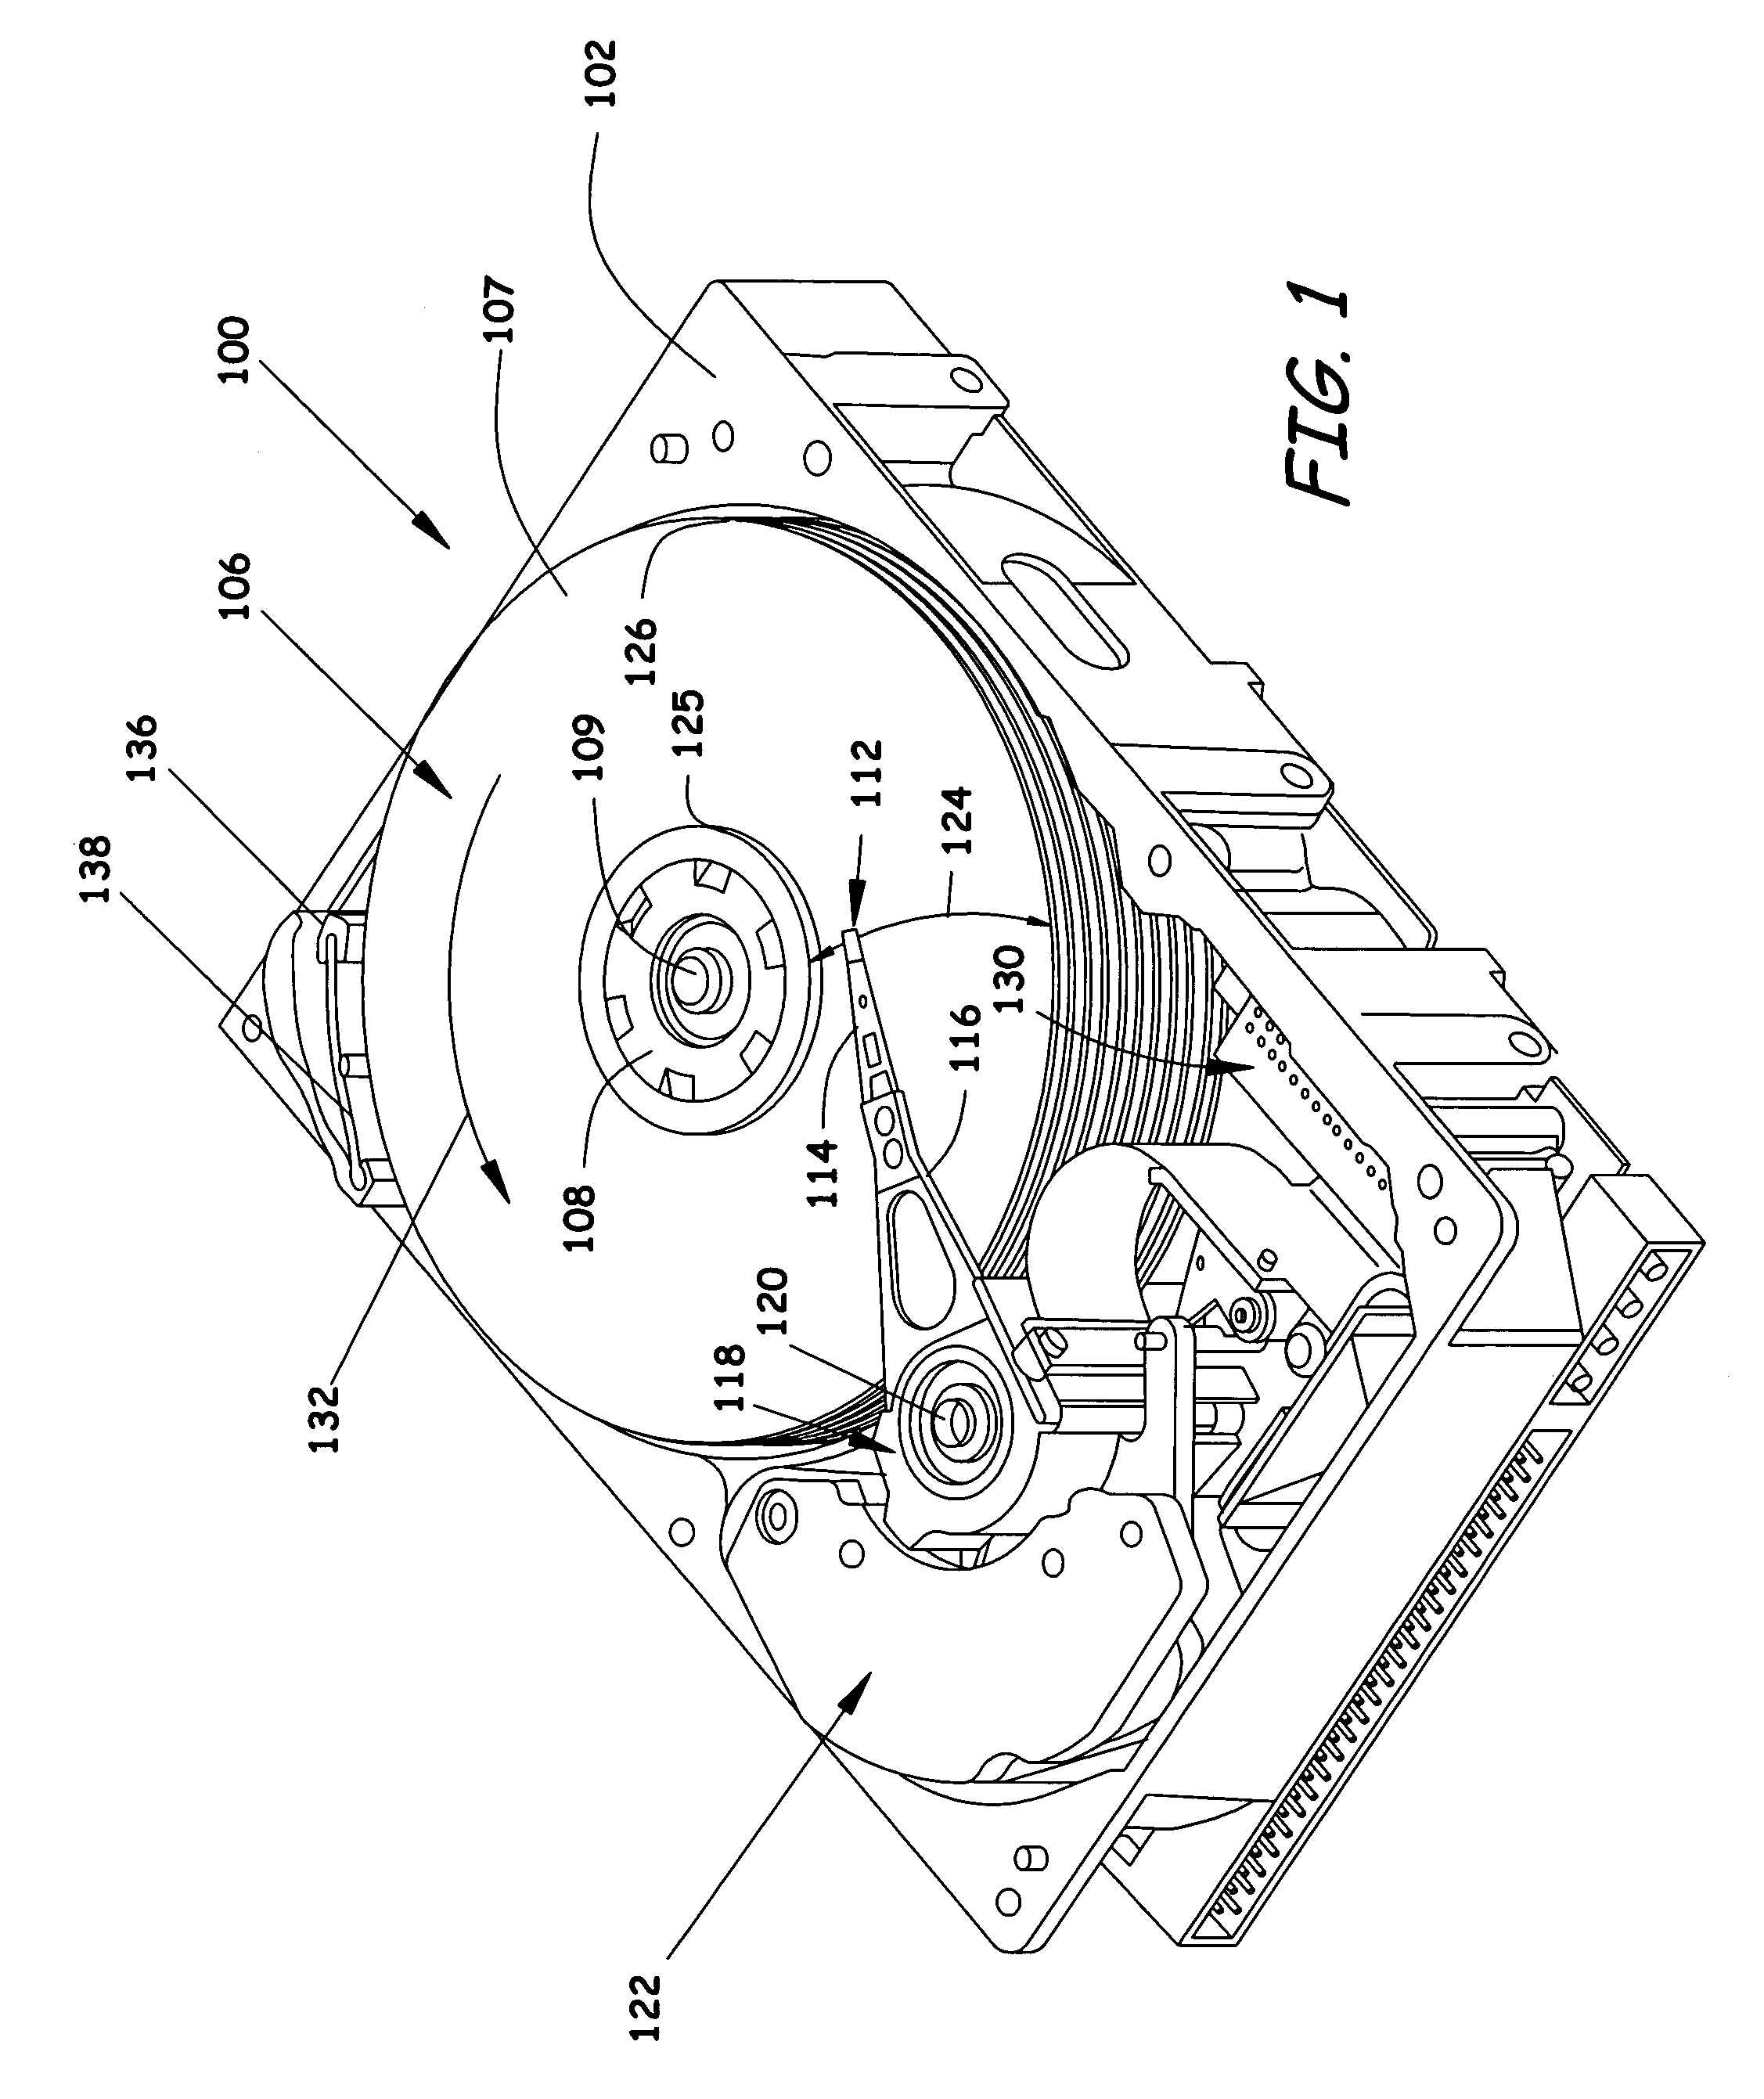 Air stream filtration system adjacent a rotational element of a data storage device